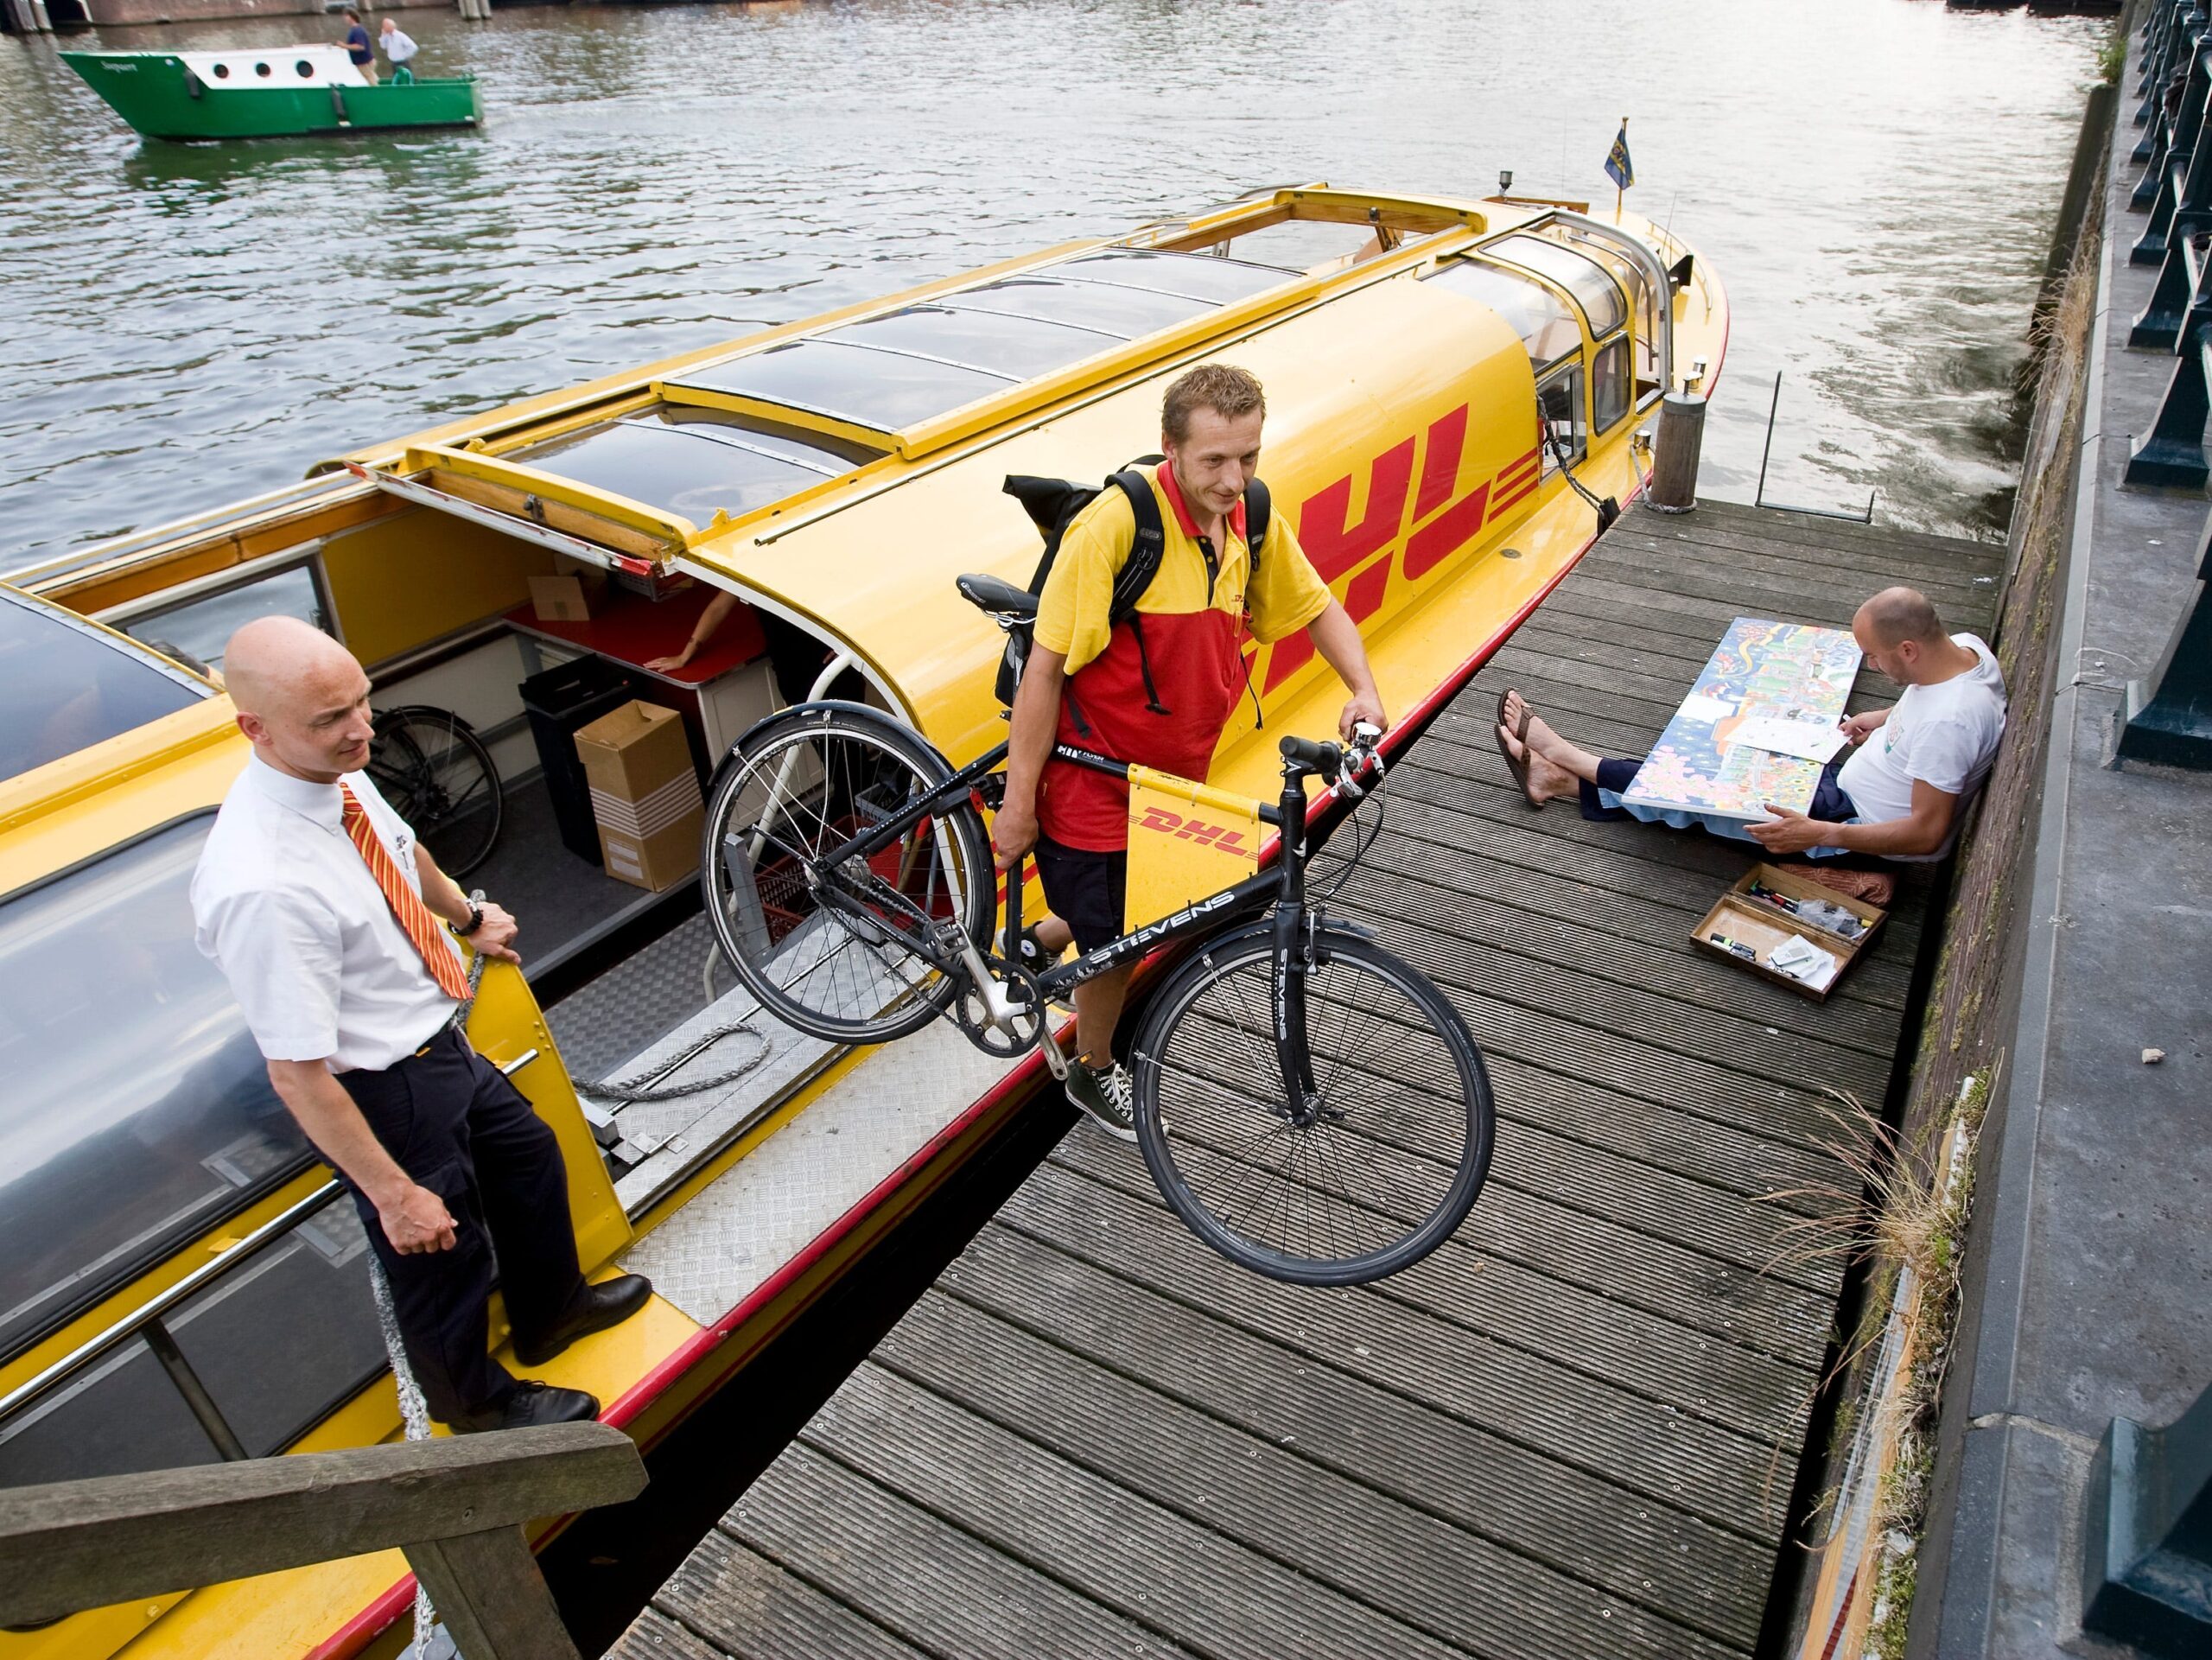 A man in a red and yellow DHL uniform lifts a bicycle off of a yellow, DHL-branded river barge while the boat driver observes.